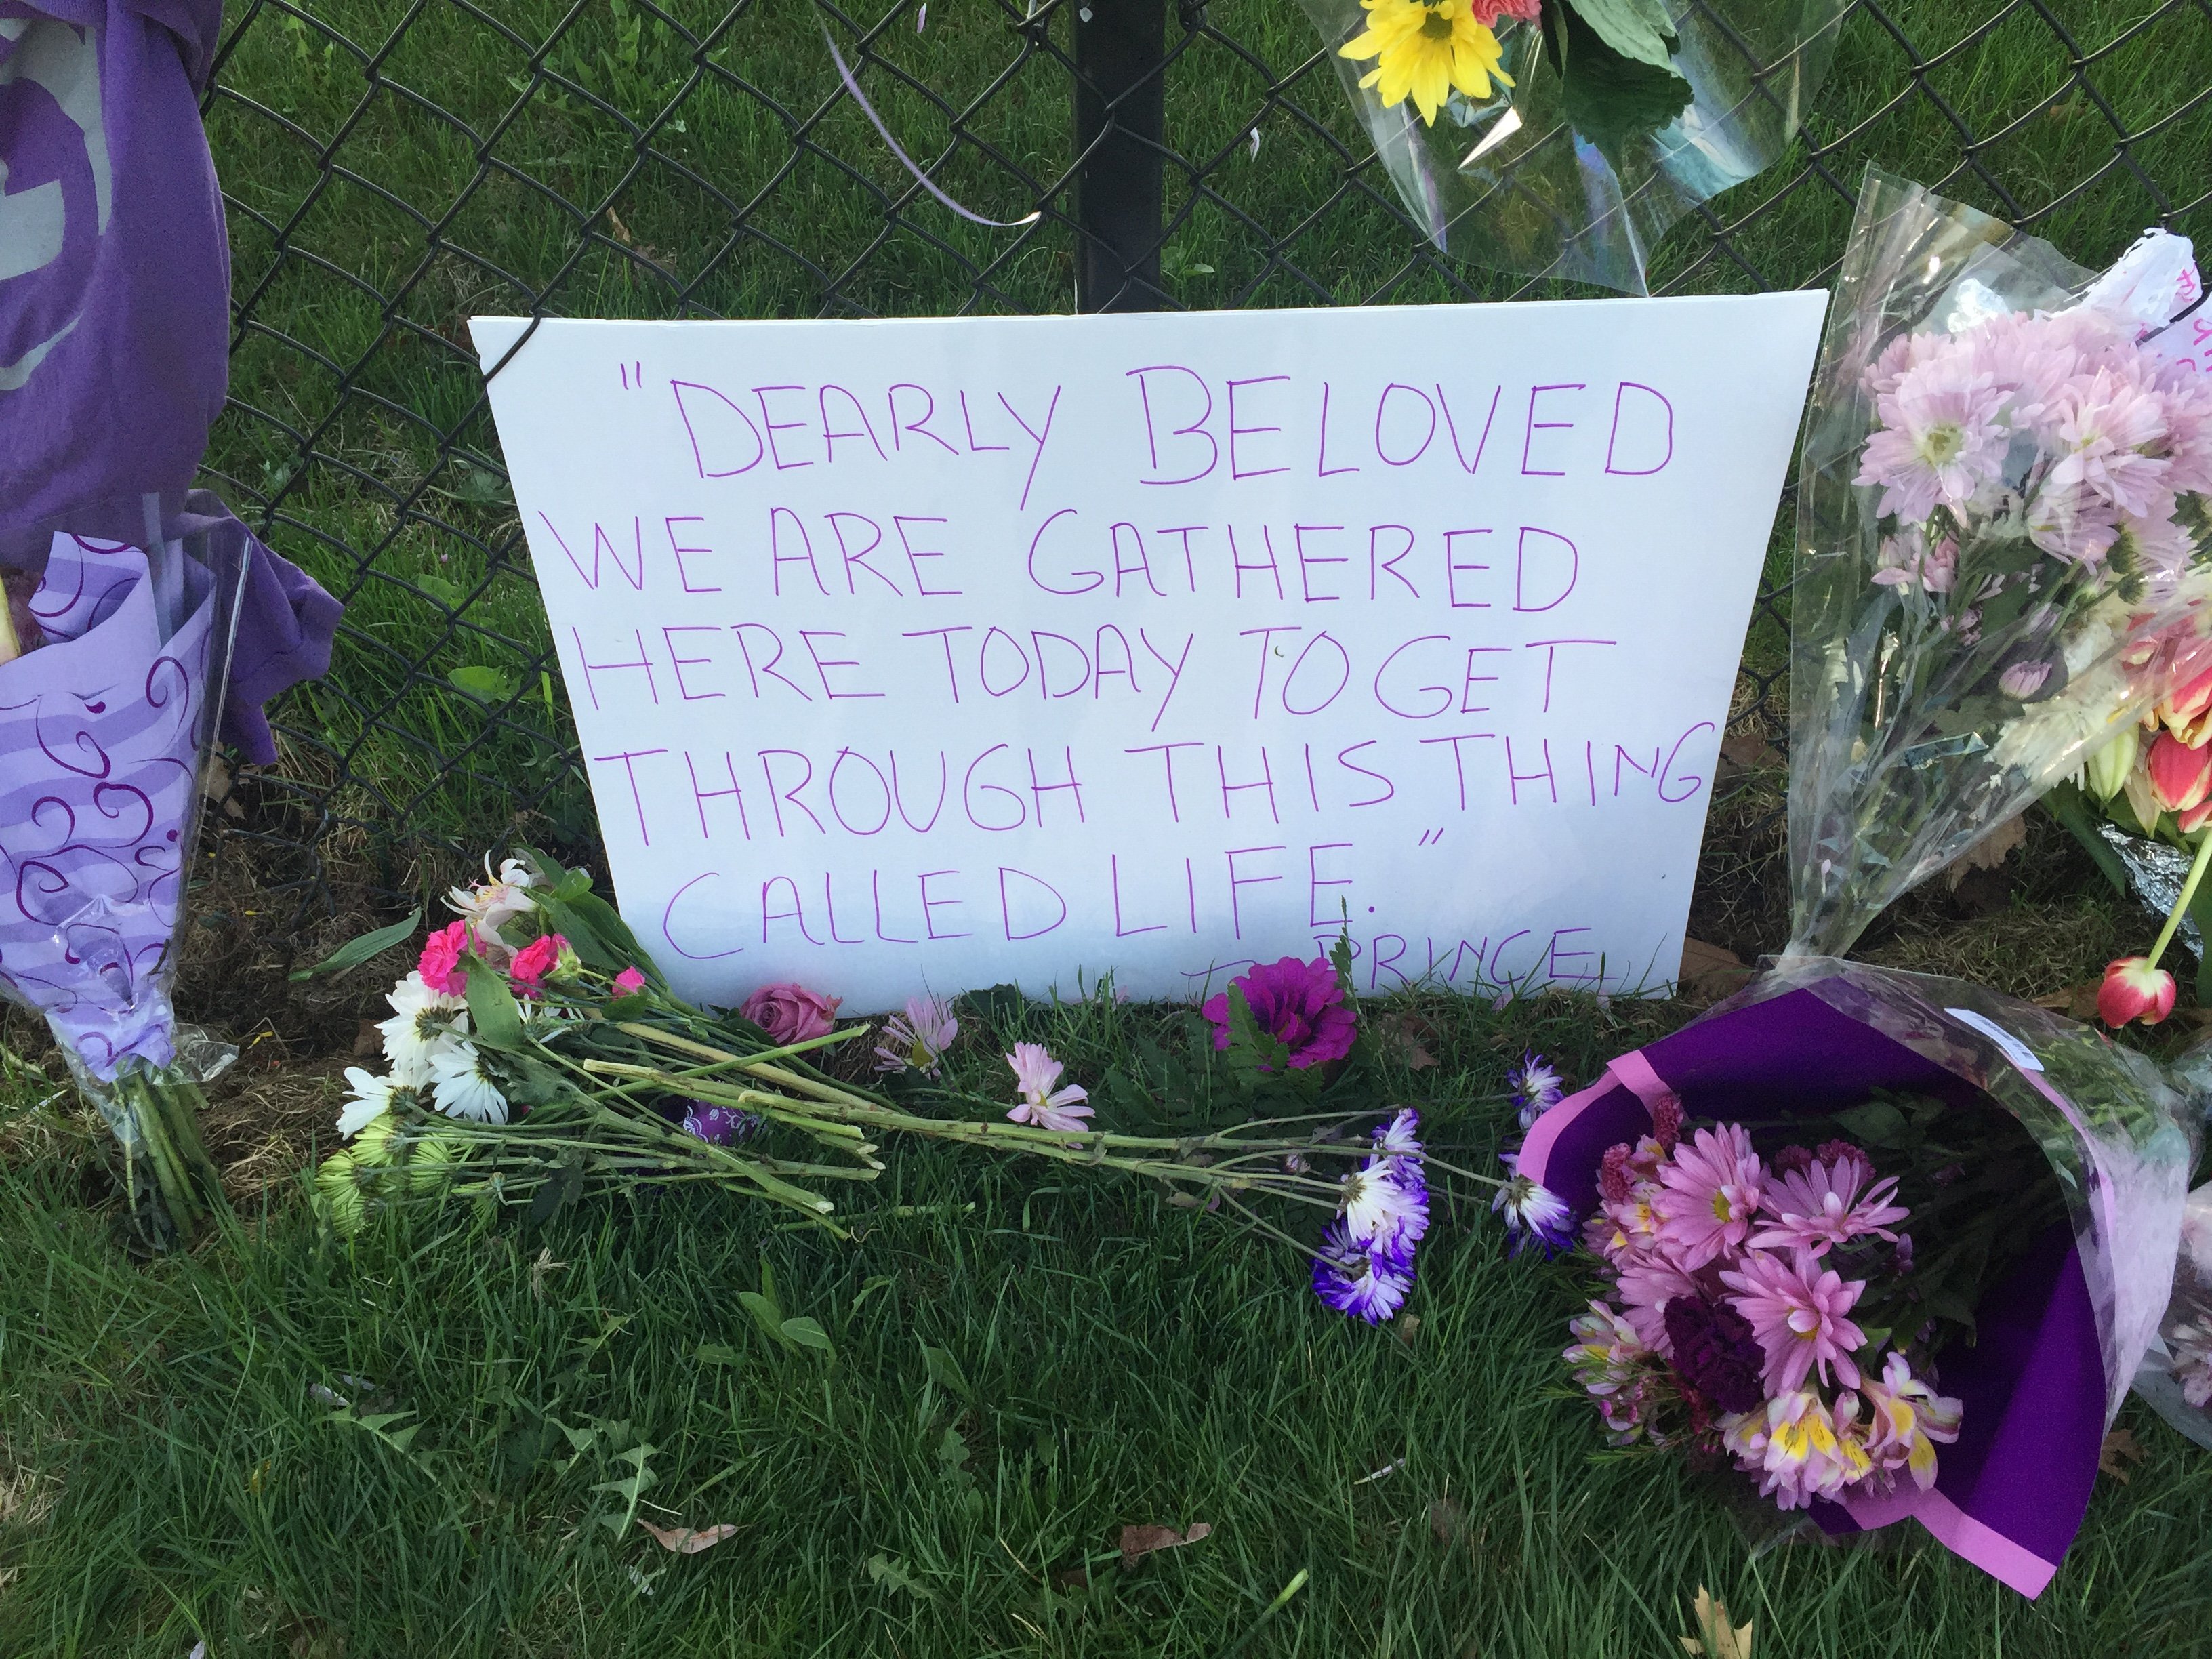 Fans gather at the growing memorial outside Prince's Paisley Park home and studio.